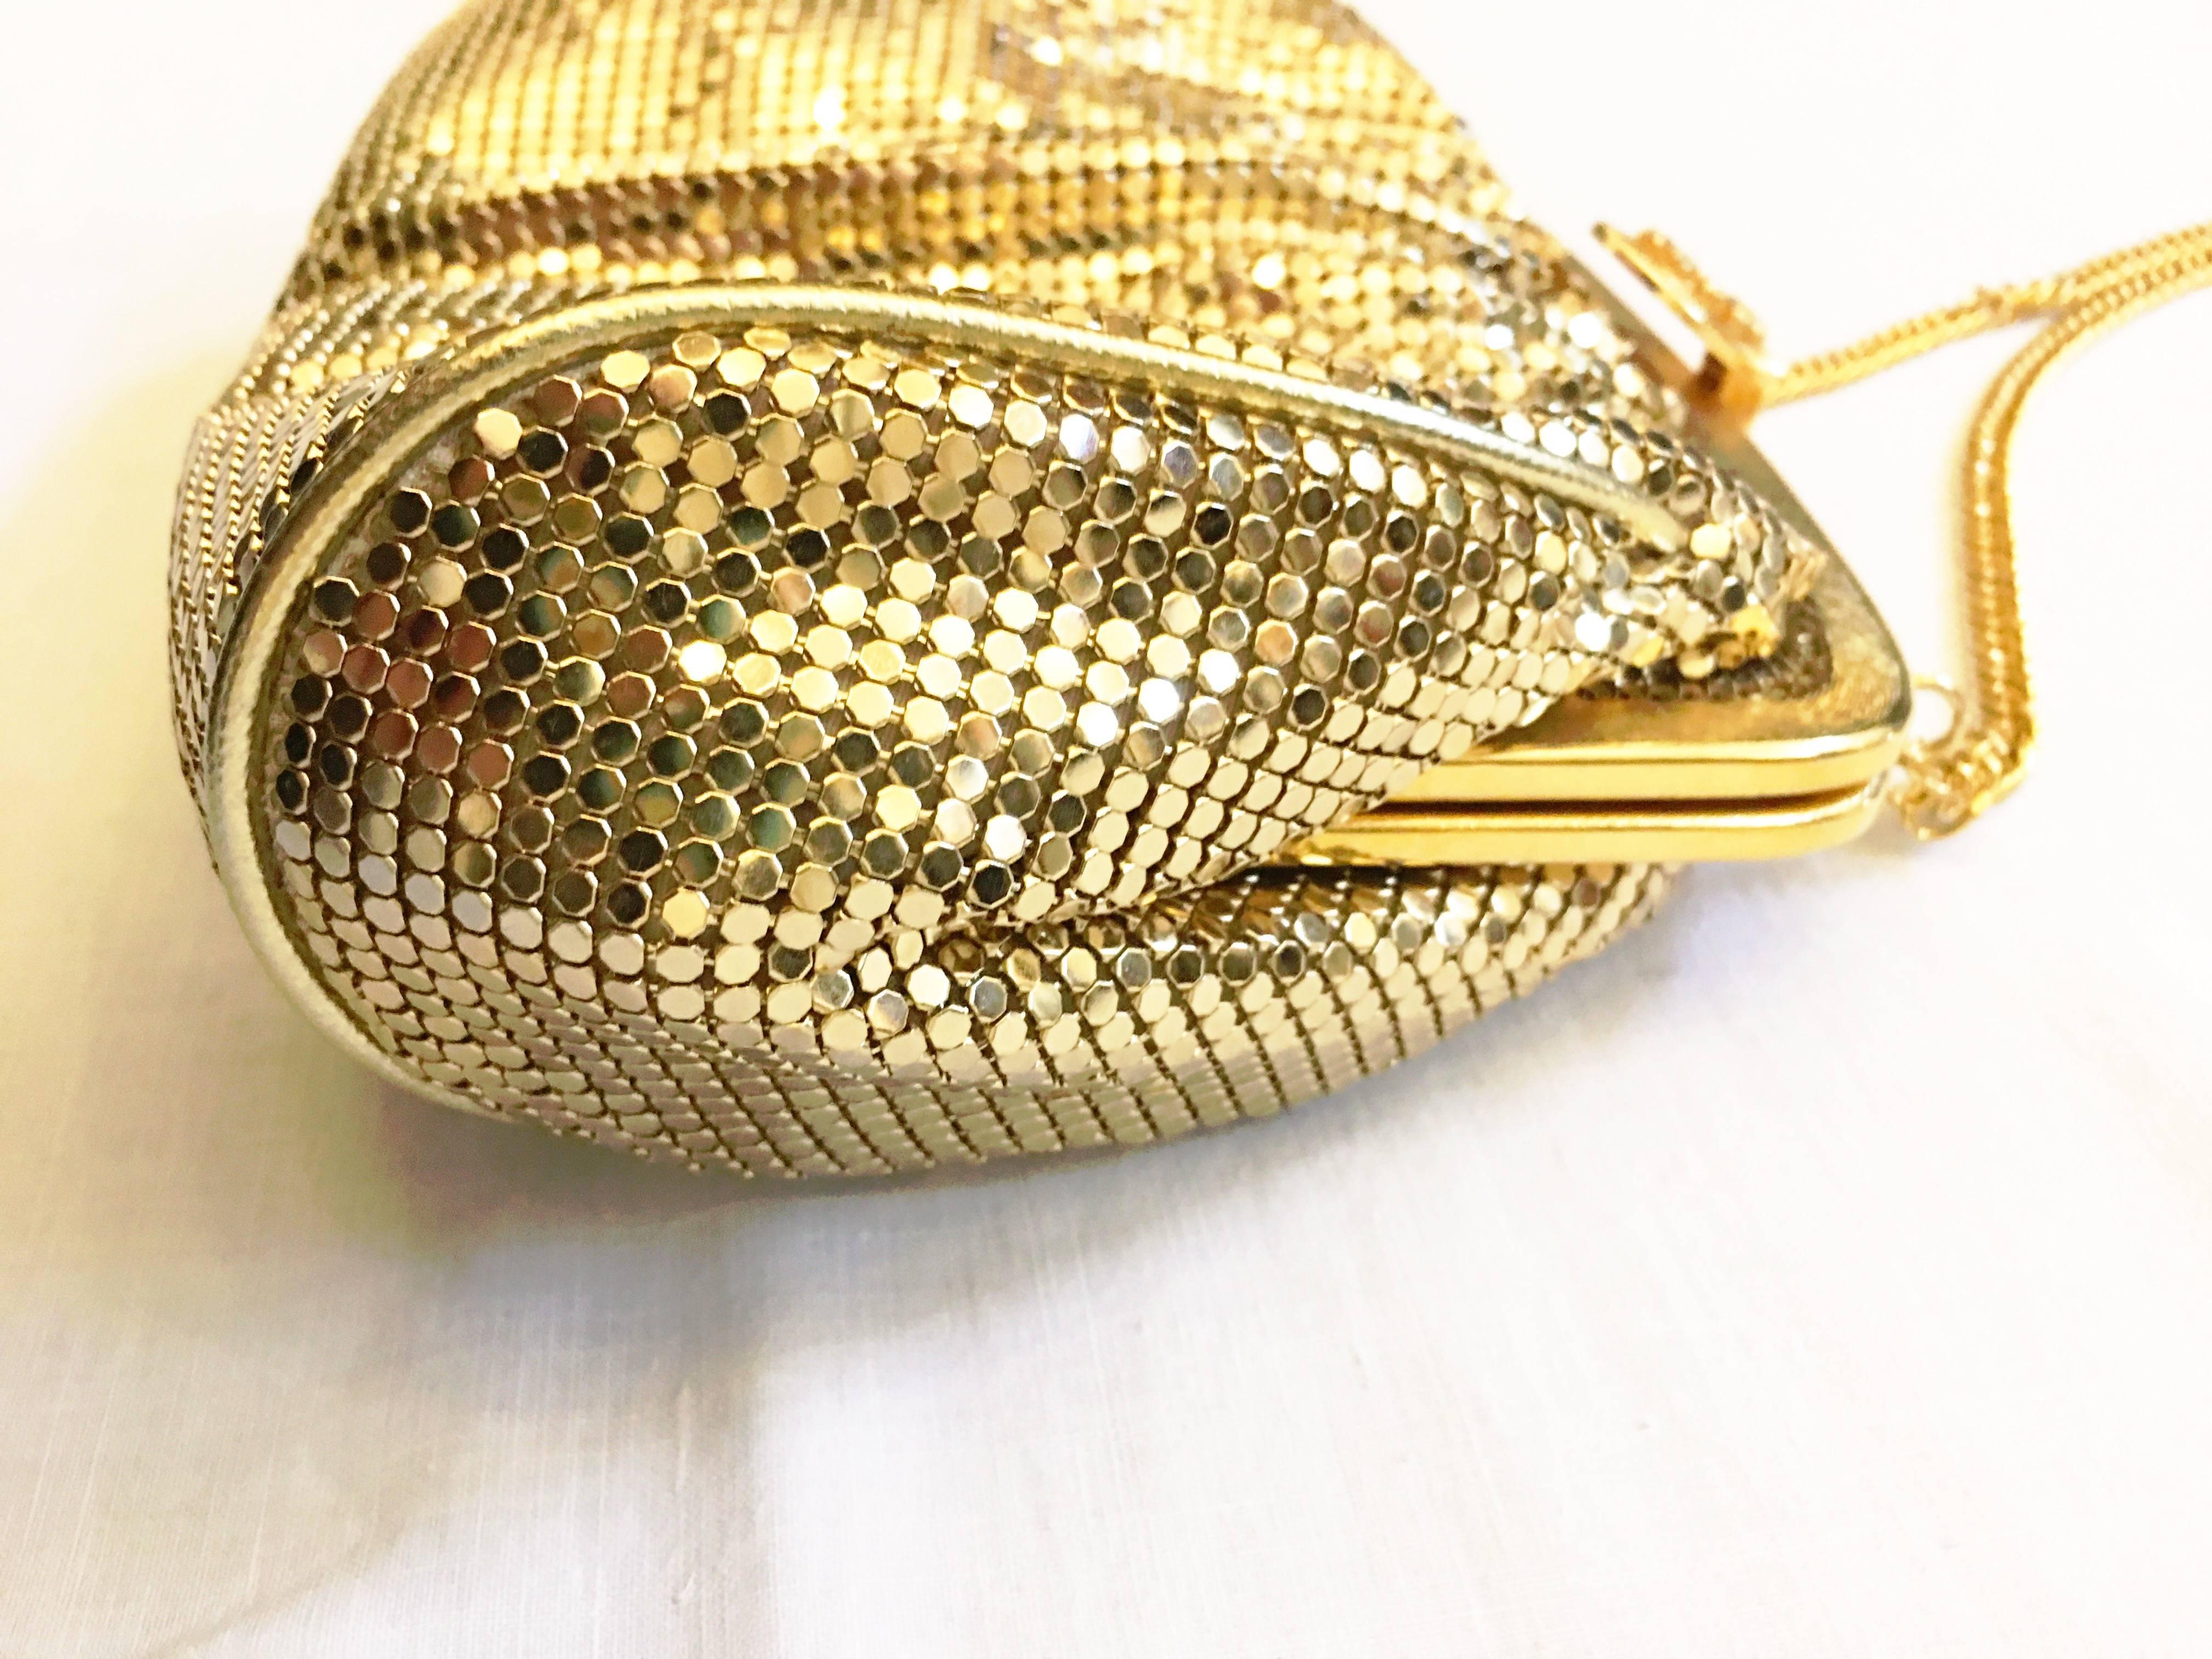 Gold evening bag in mesh. Fully lined. One inner zip pocket. Rhinestone embellished clasp. Includes original tag. Gold tone chain shoulder strap. Gold tone metal at top where the bag clasps and gold piping at trim. Perfect size to fit anything you